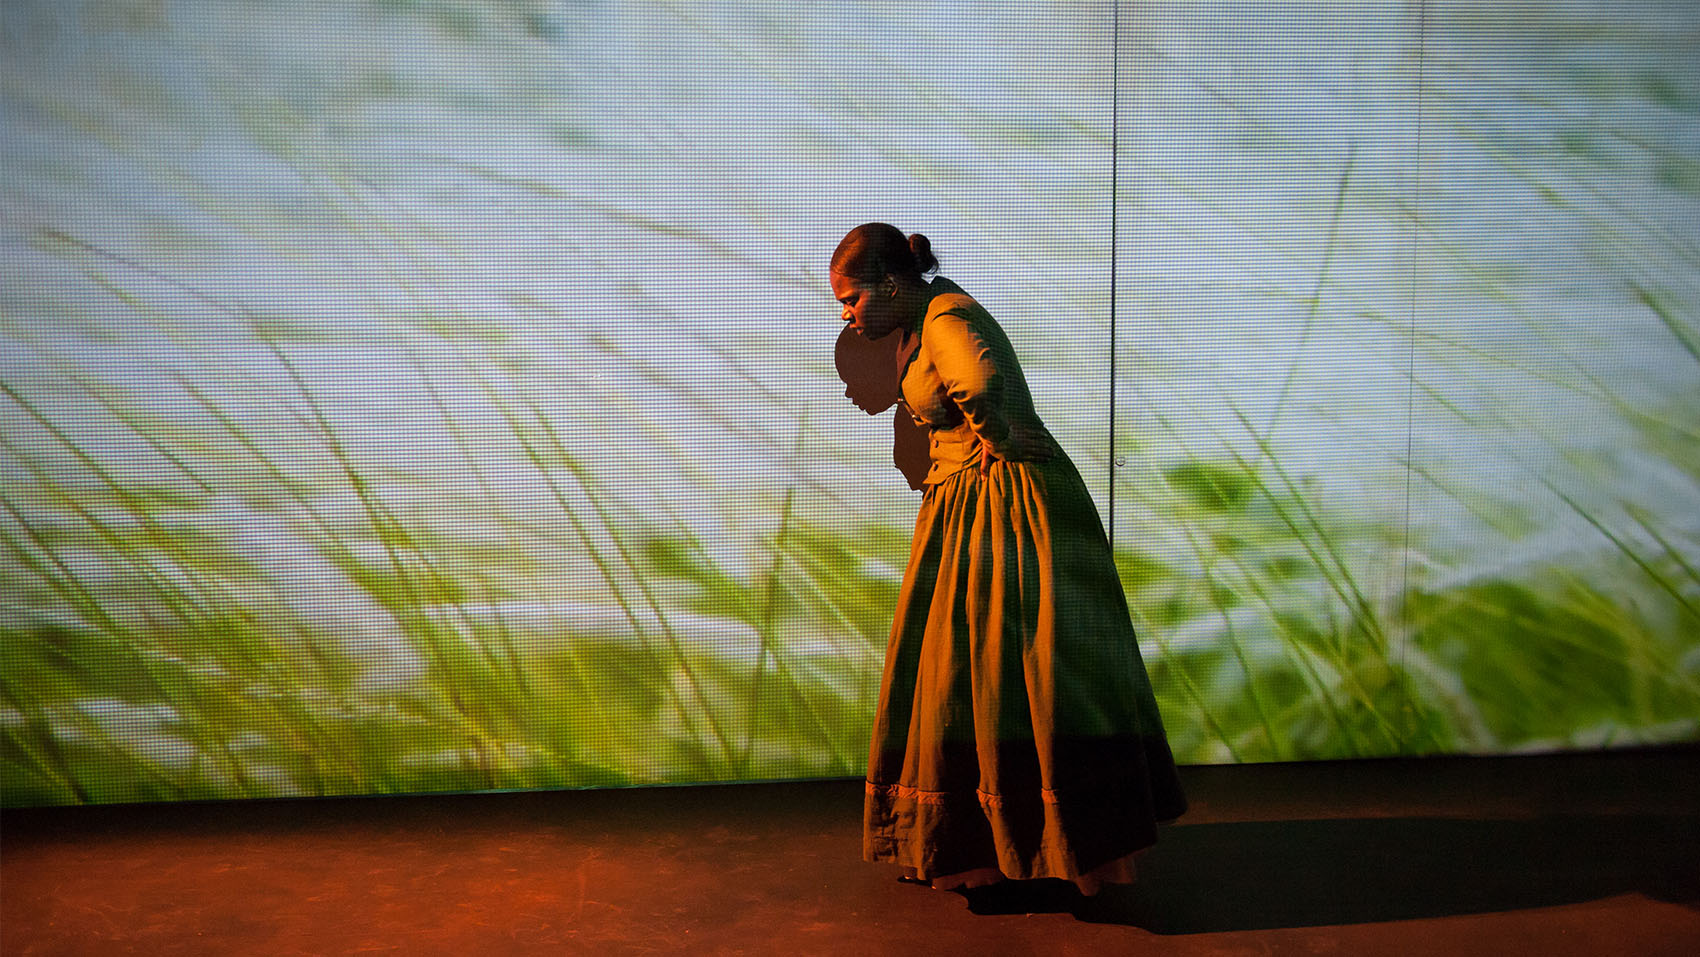 A young black woman in a vintage dress looks out of breath, her hands on her hips a screen projected with field crops and grasses stands behind her.